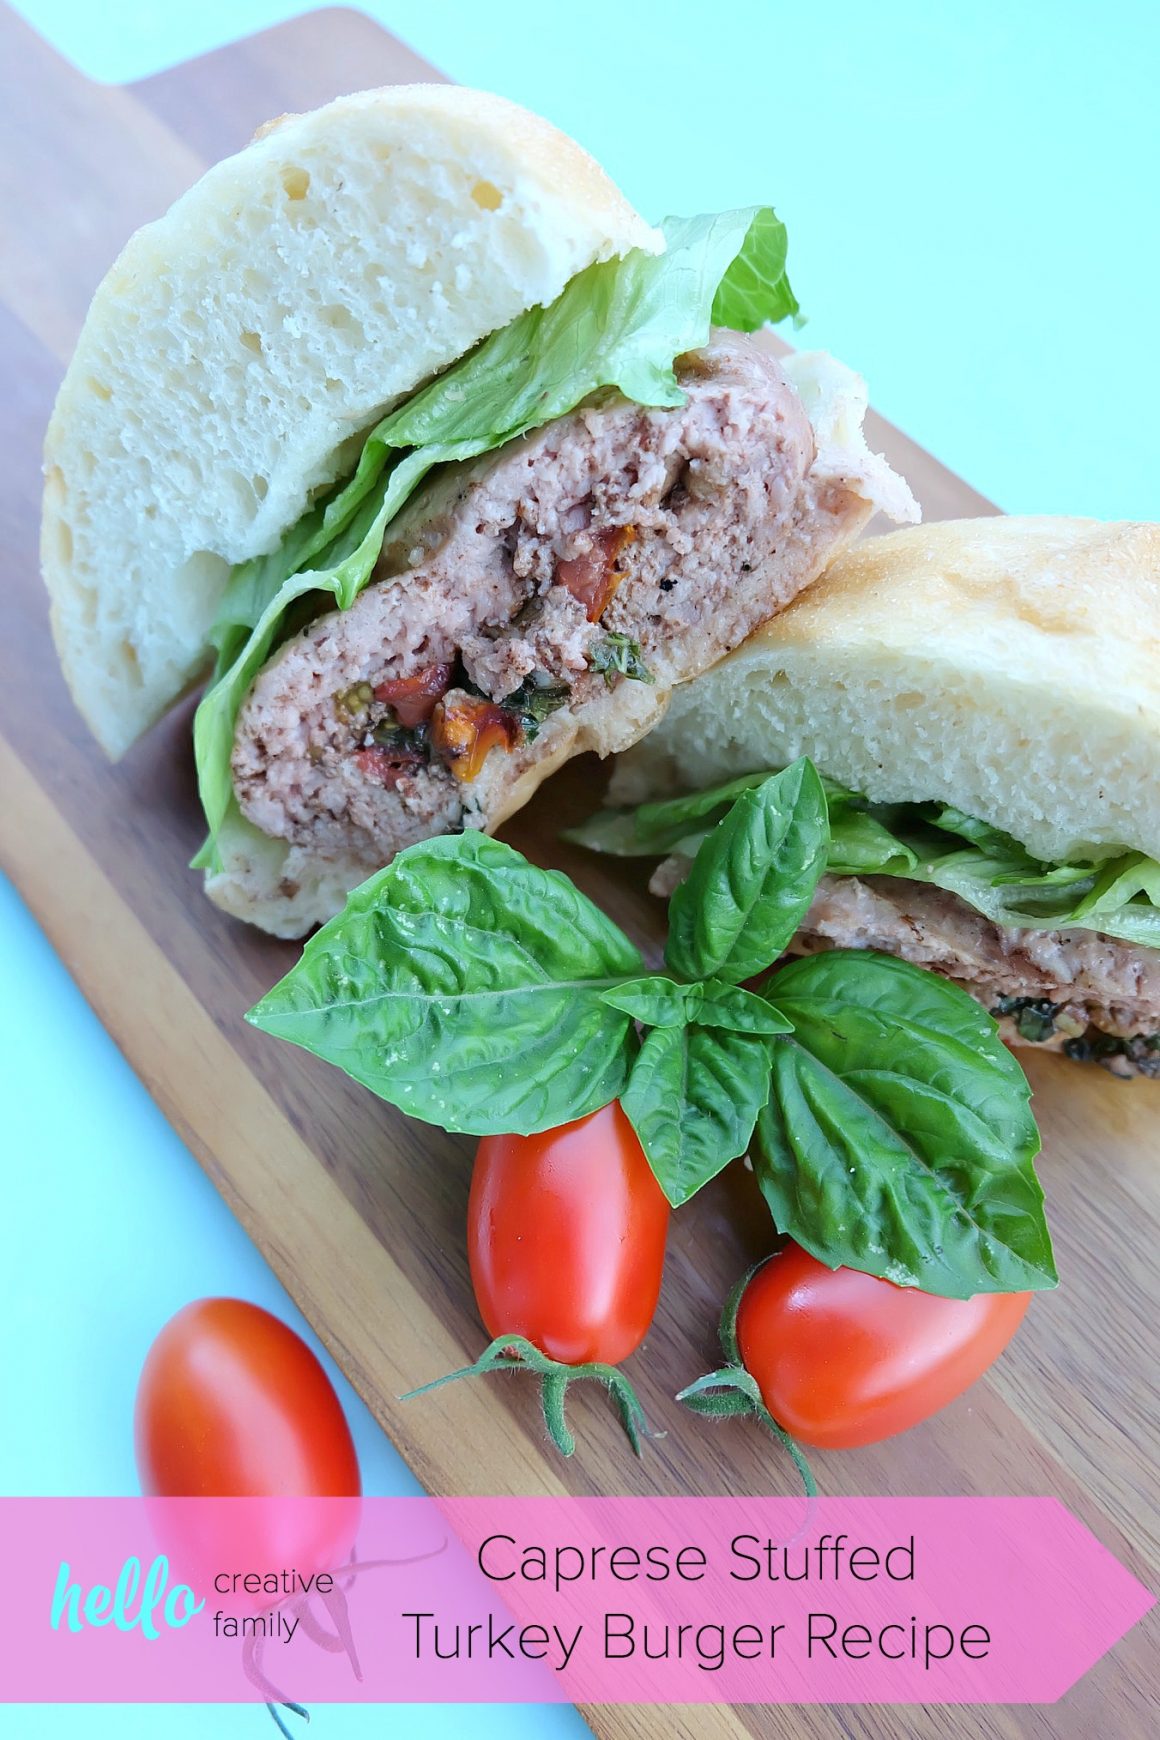 This Caprese Stuffed Turkey Burger Recipe is filled with all of the flavors of summer. Juicy, flavorful and a healthy burger too! You'll feel good about feeding this easy 30 minute meal to your family! #Turkey #Burger #StuffedBurger #Recipe #Sponsored